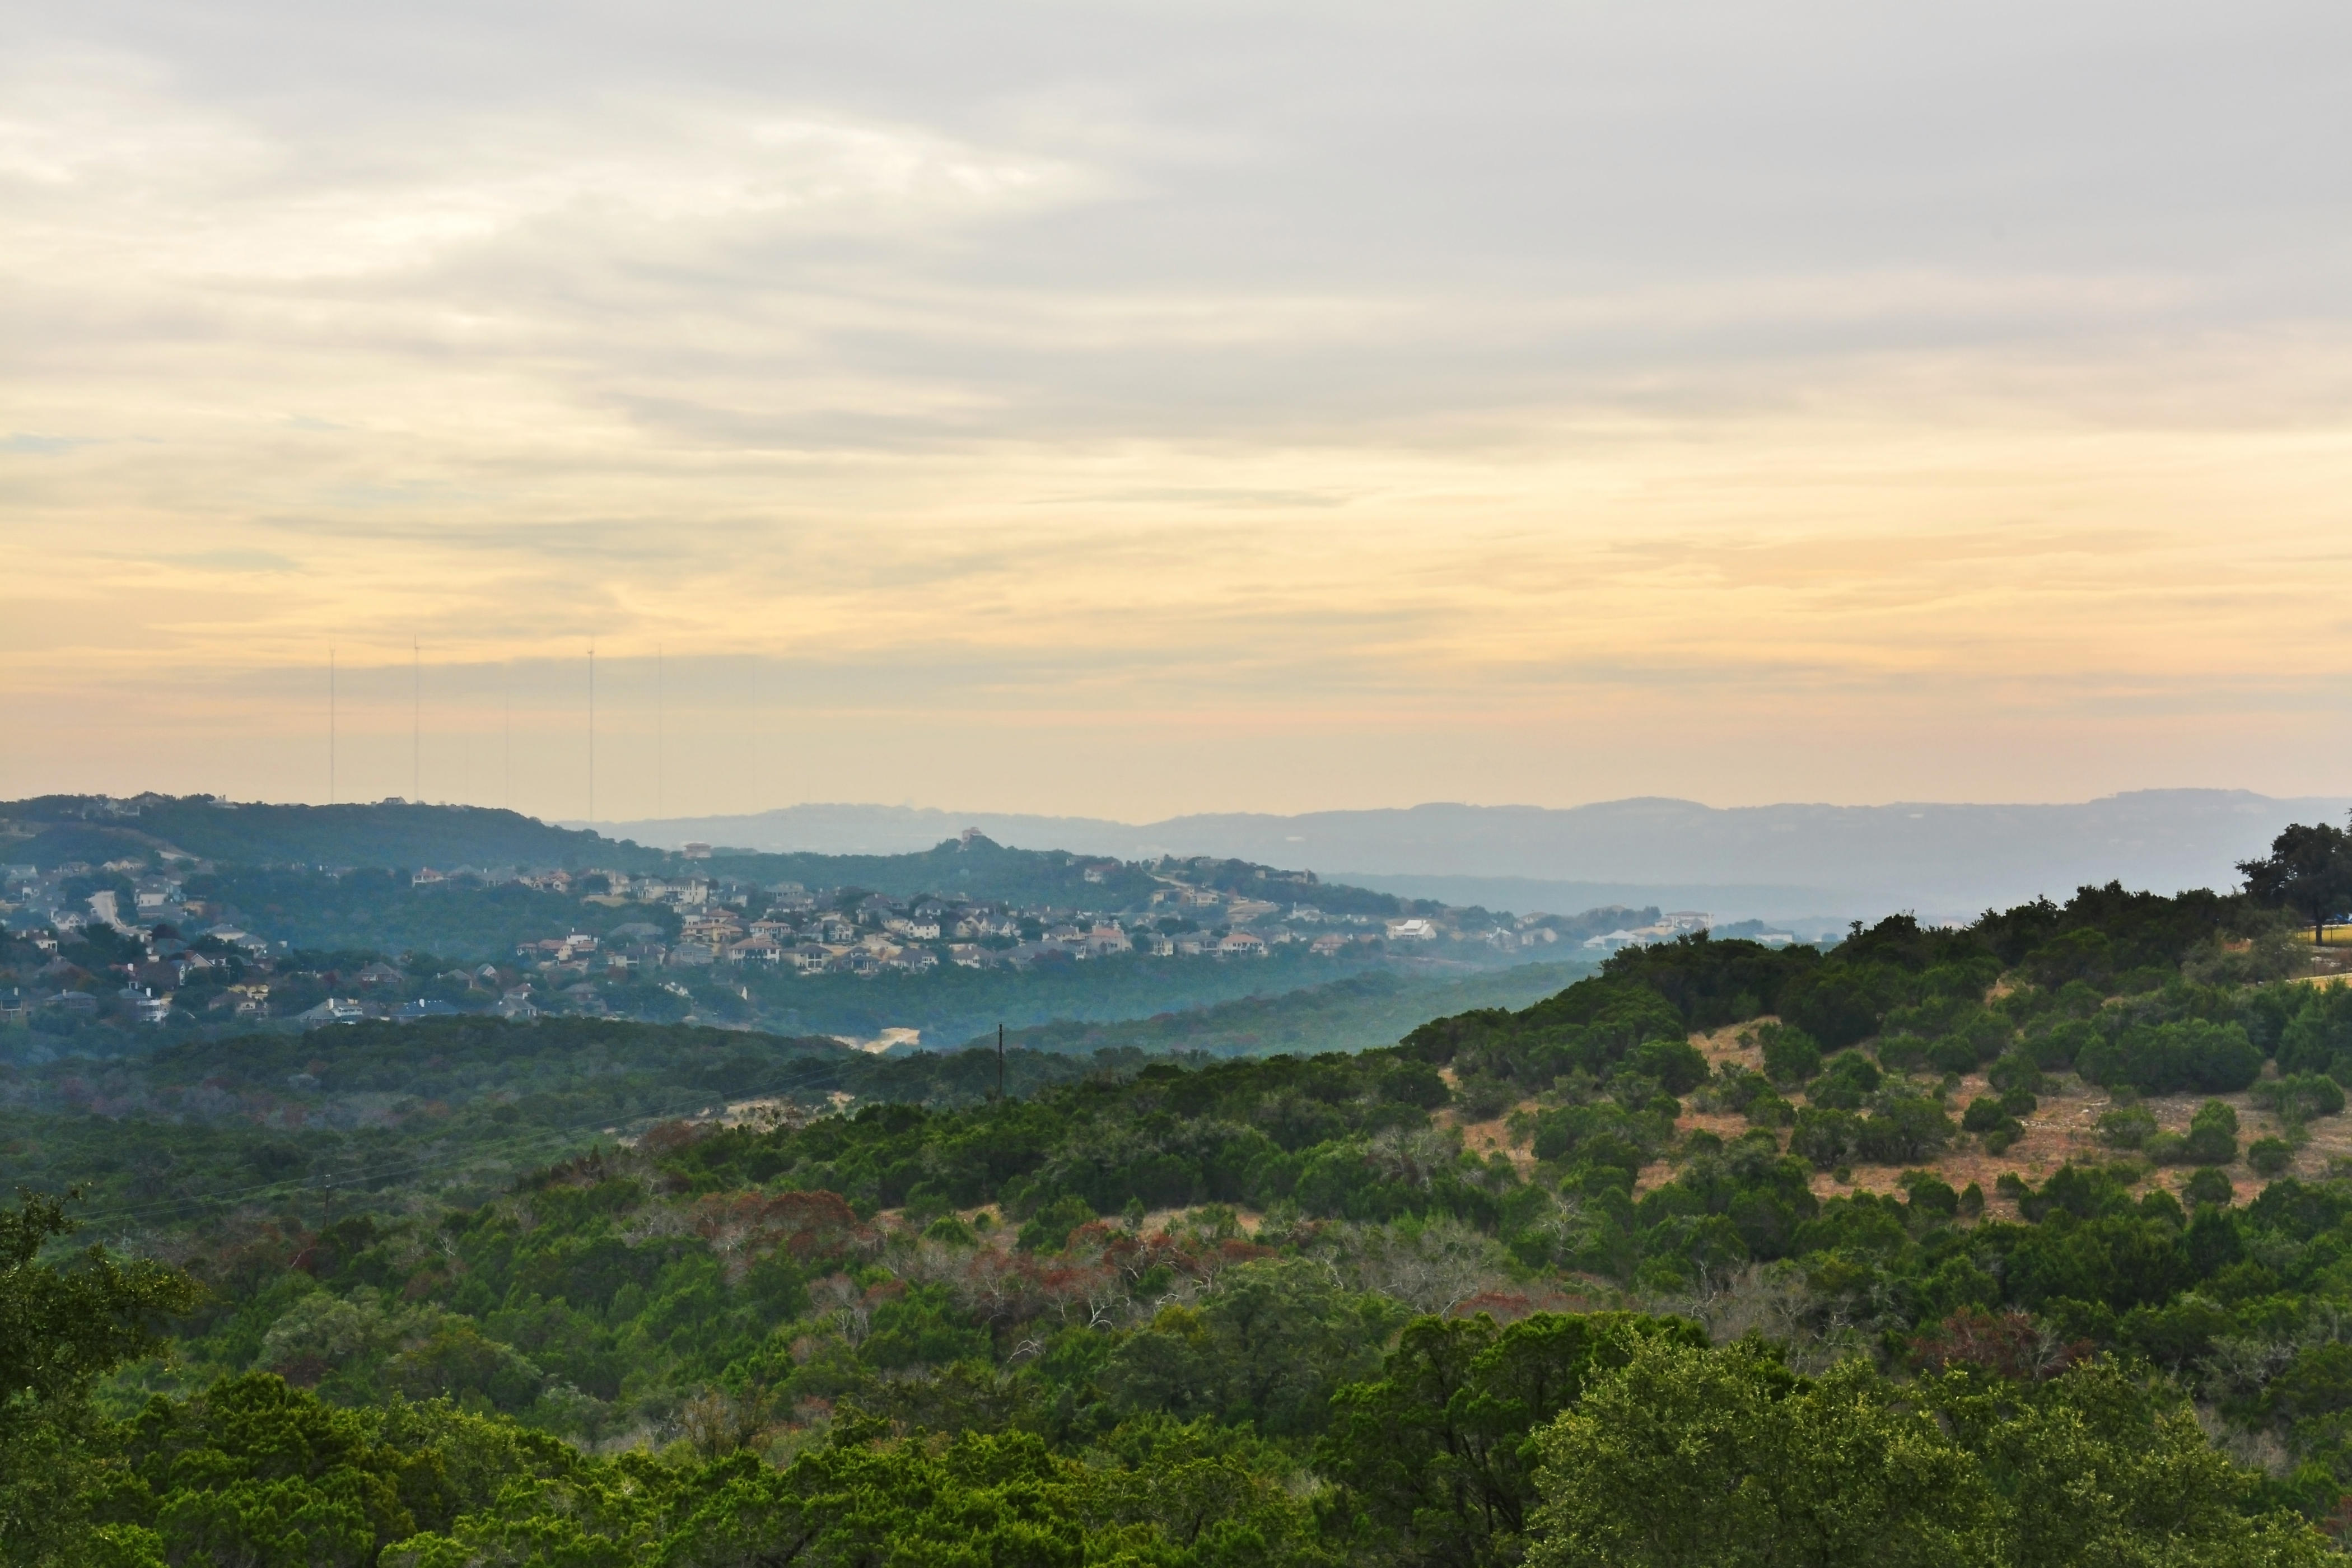 “We anticipate that Austin home buyers will fall in love with the beautiful views that will be offered at Lakeview,” said Michael Lindeman of Taylor Morrison.